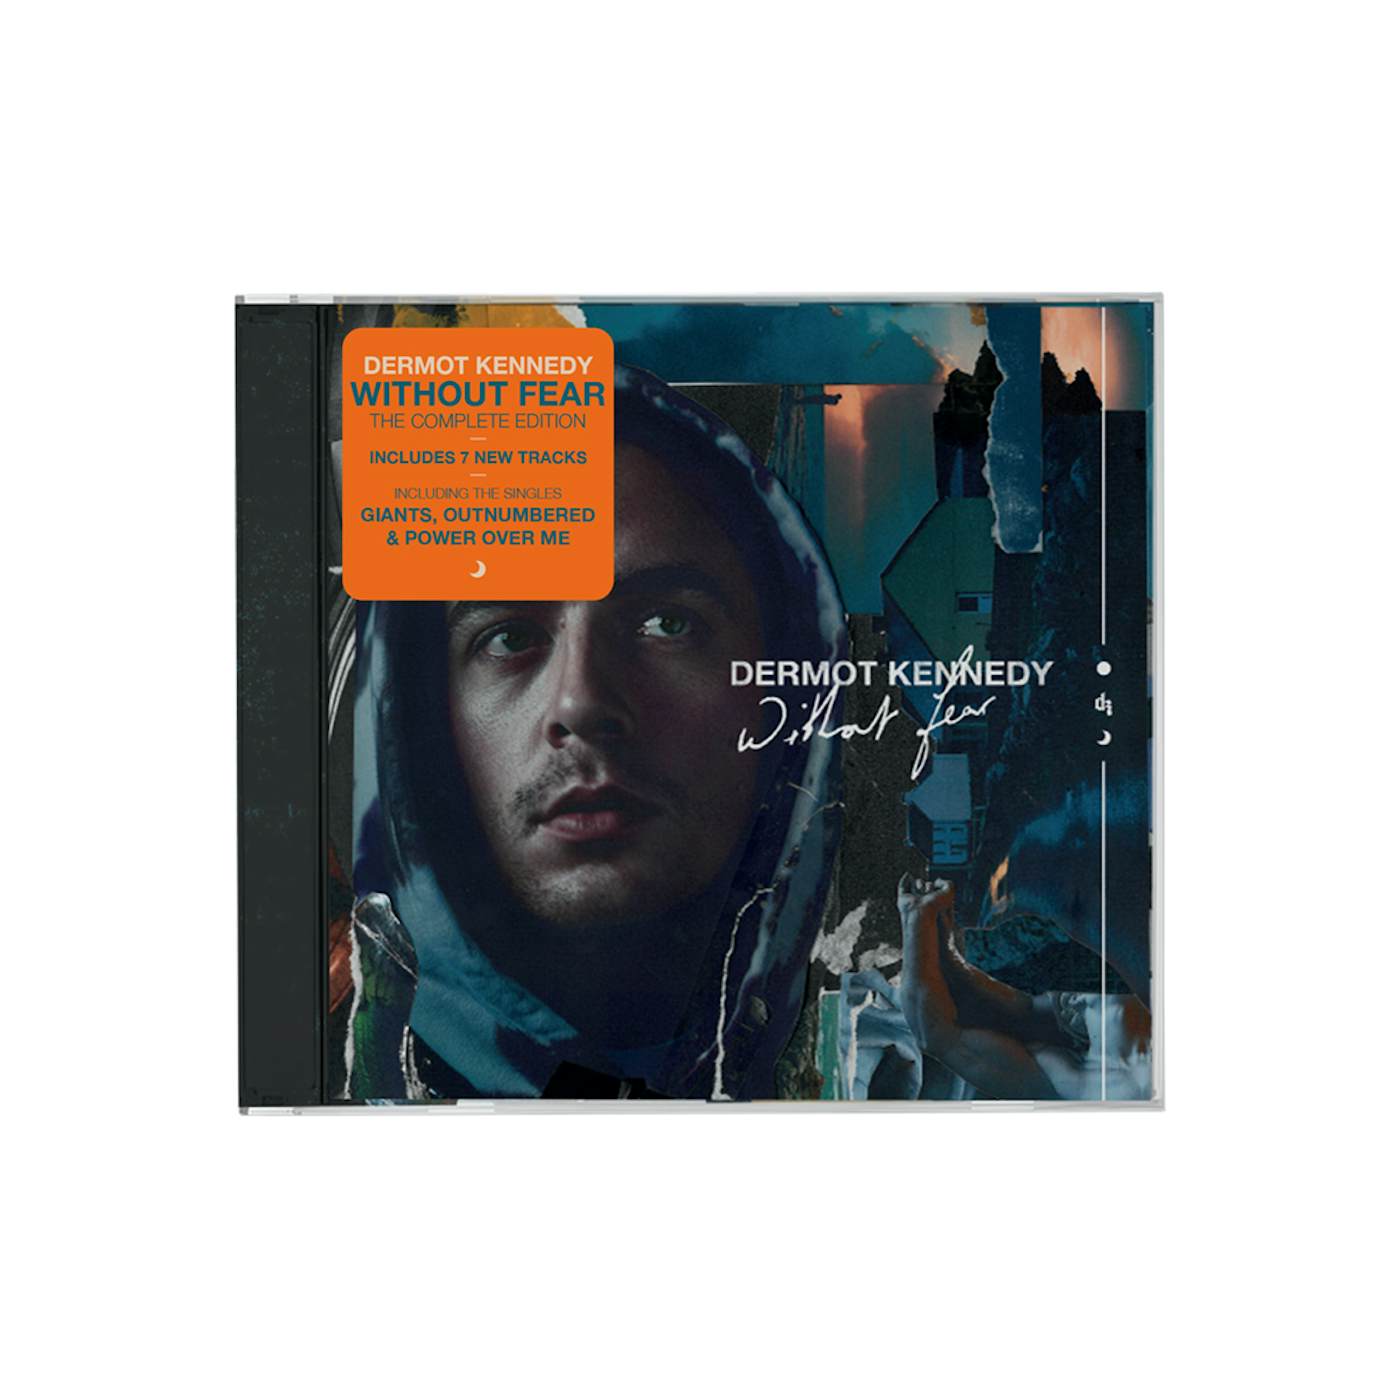 Dermot Kennedy Without Fear - Complete Edition CD